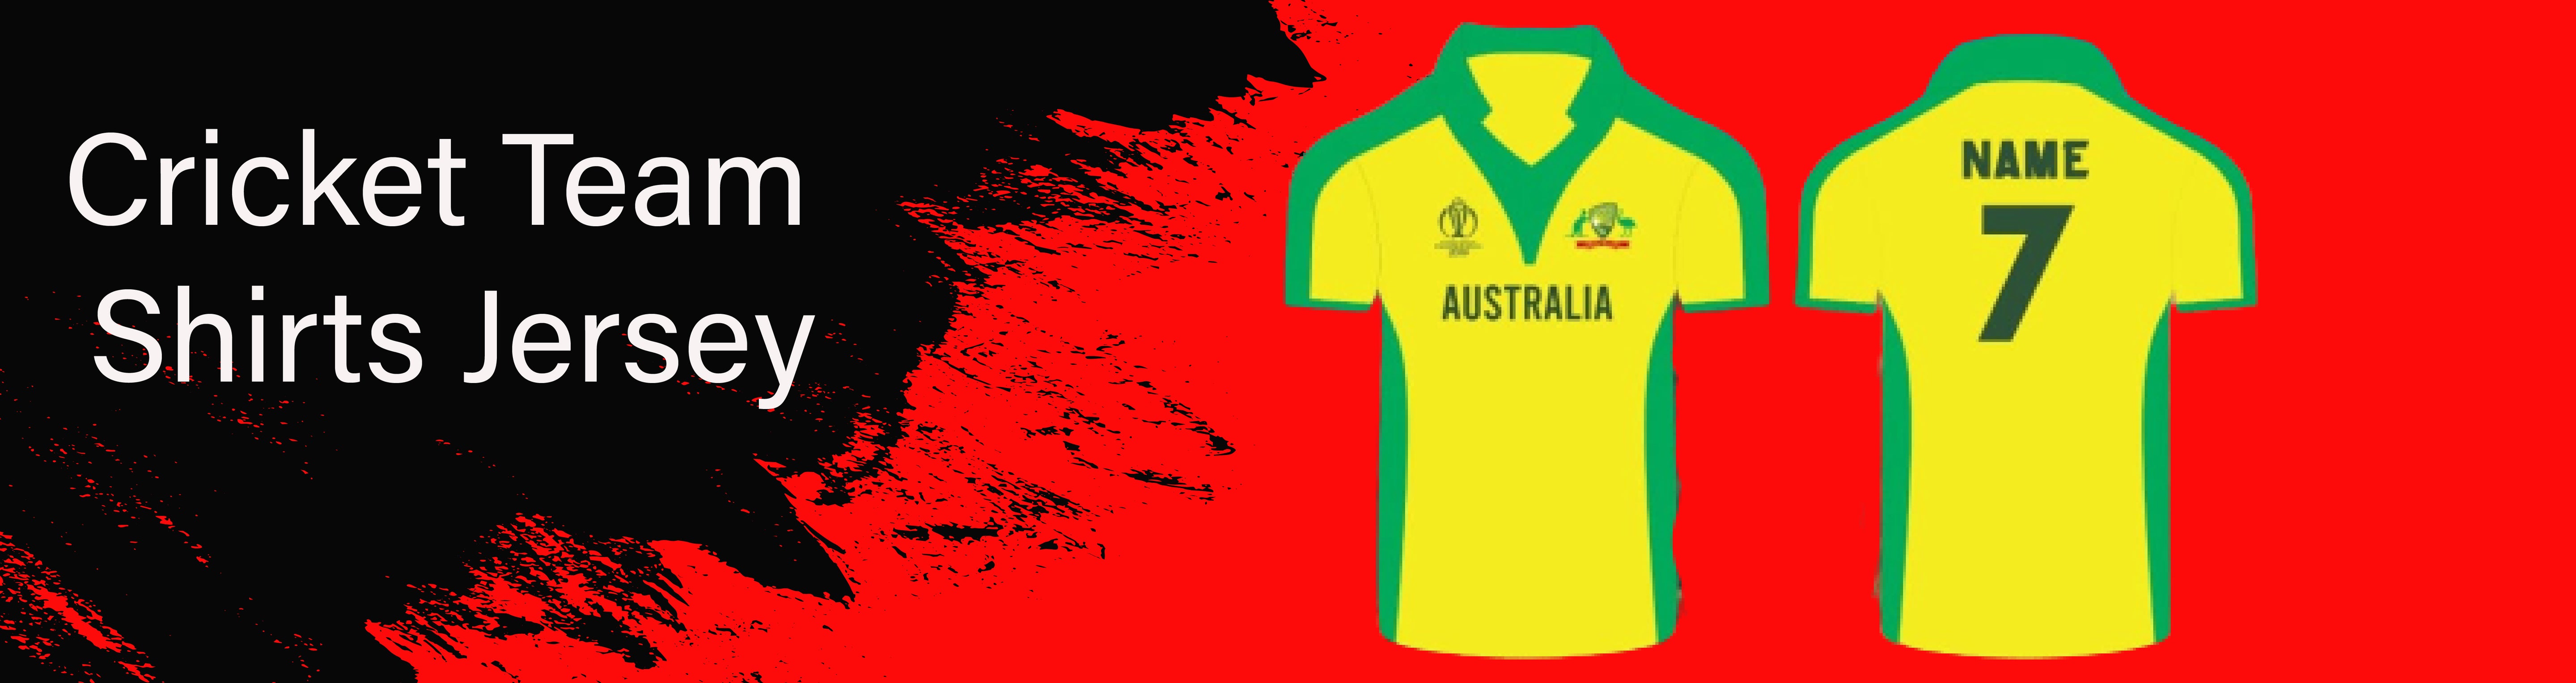 Collection image Collections Cricket Team Fan Shirts Jersey